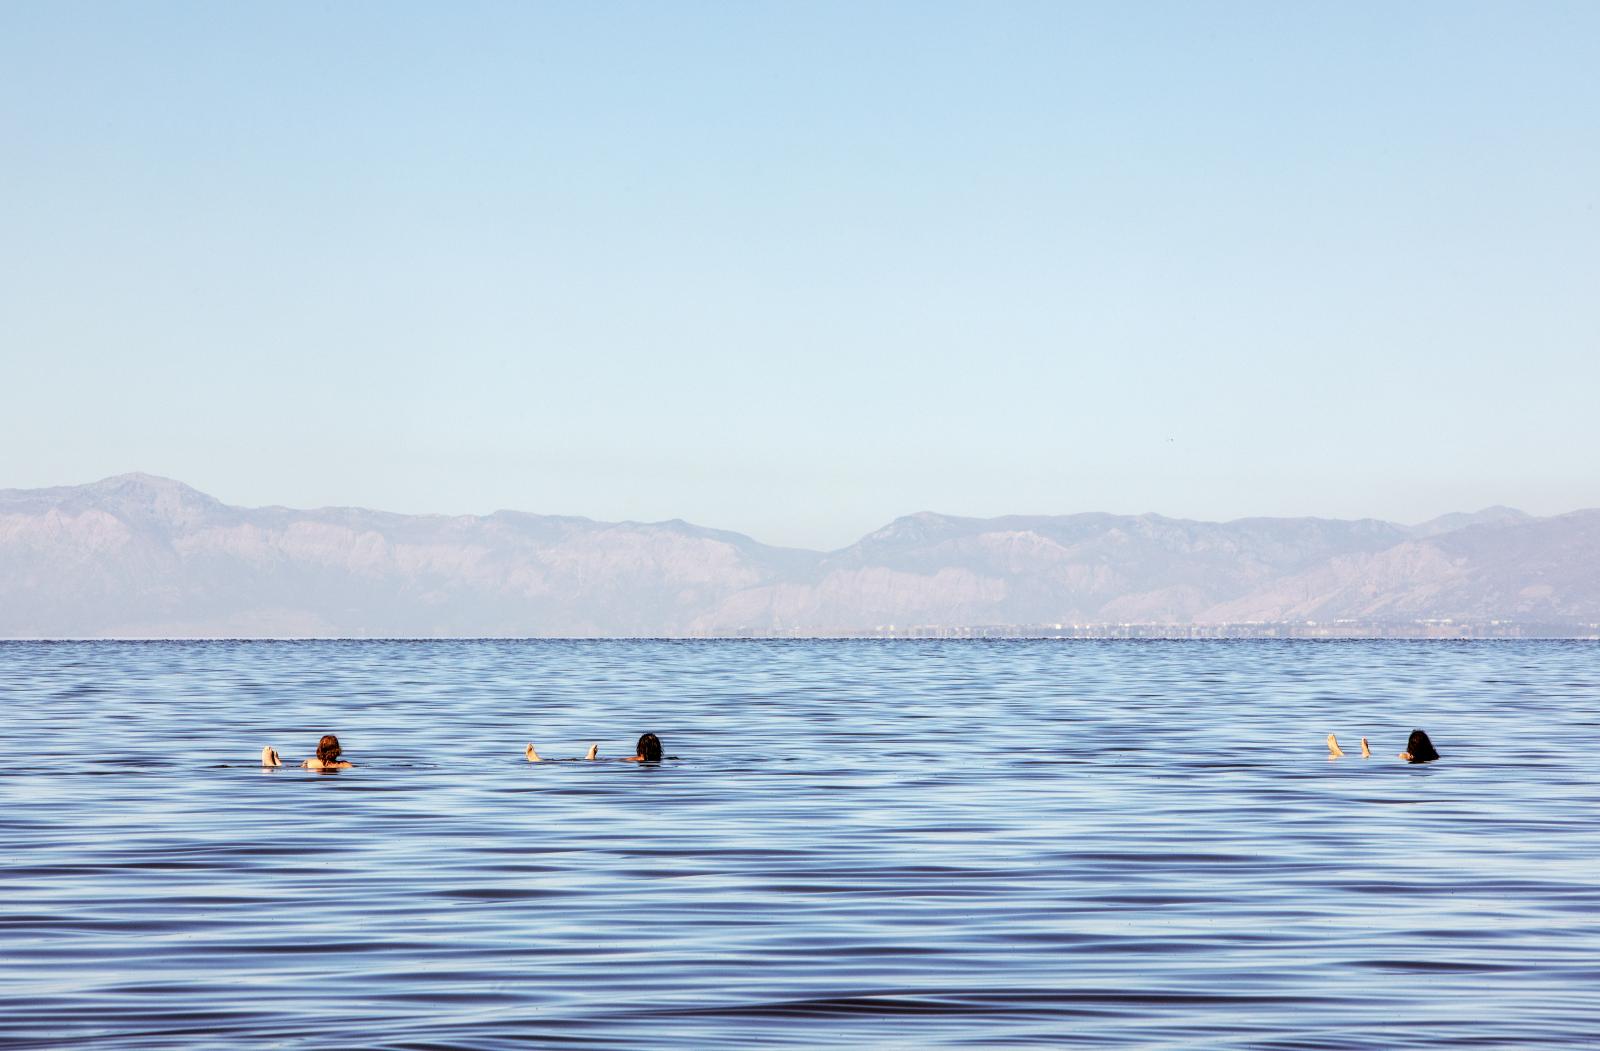 Floating in the Great Salt Lake